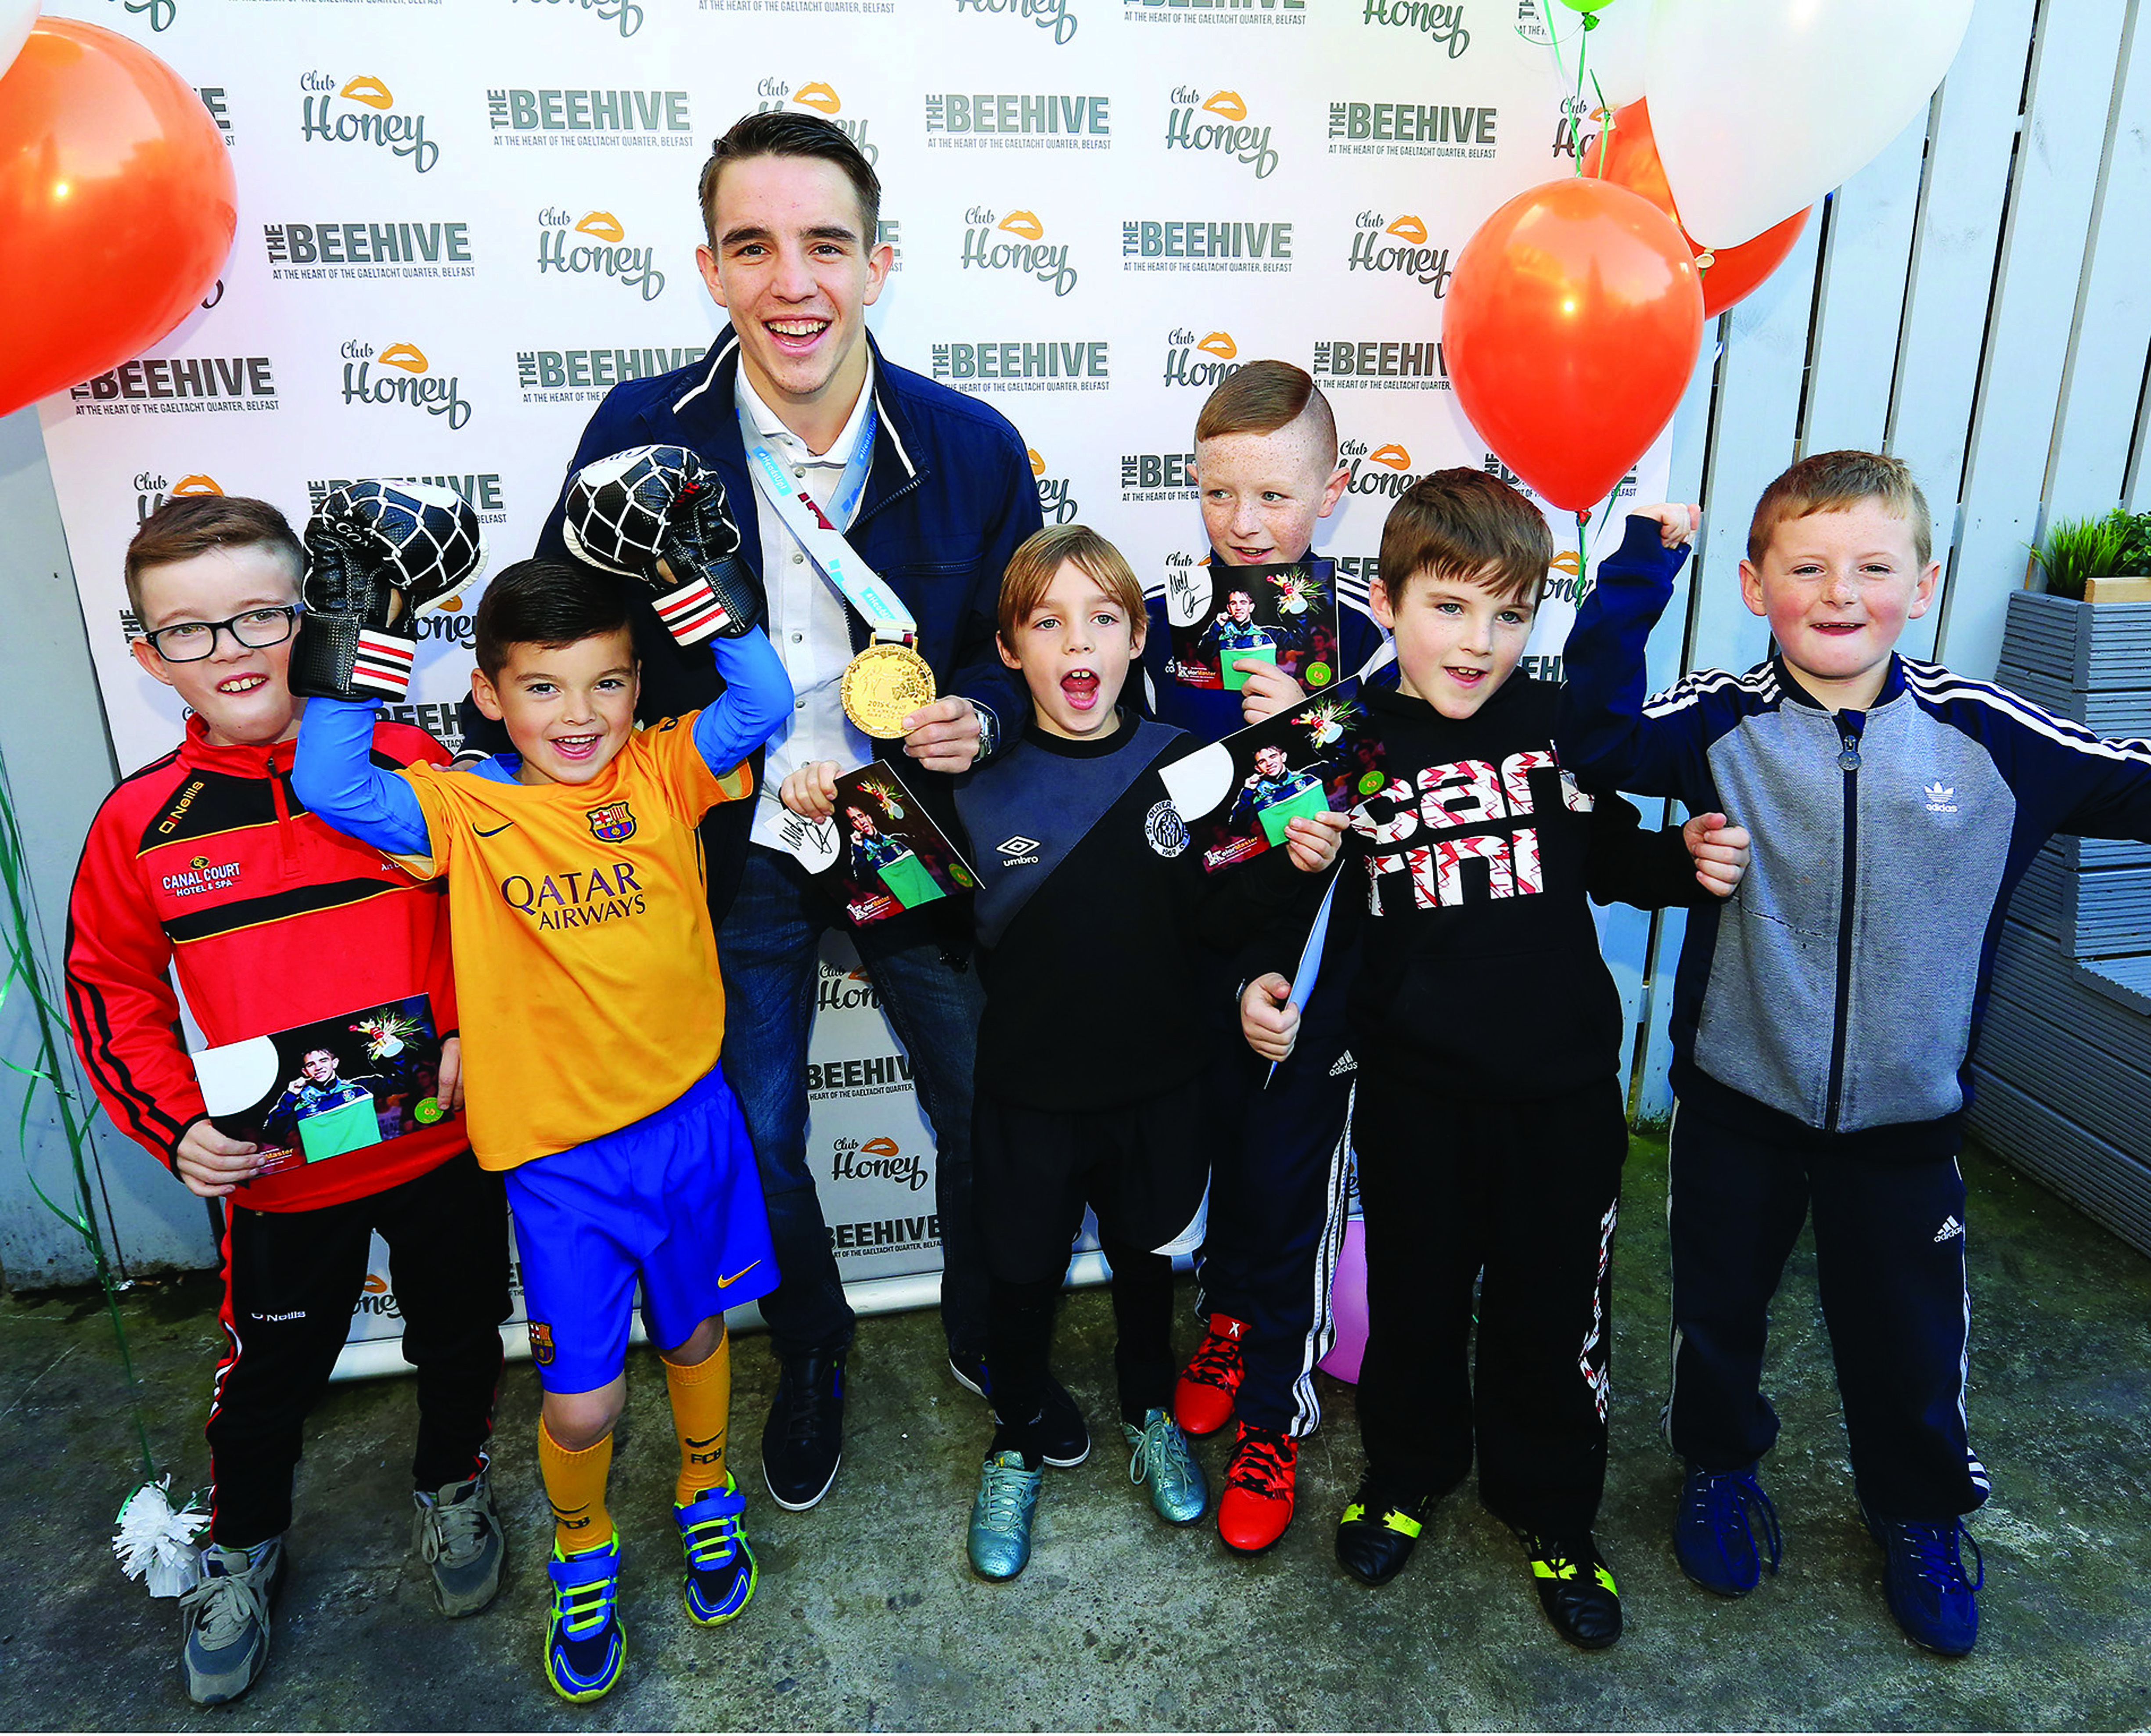 Michael Conlan meets some young fans during a homecoming at The Beehive